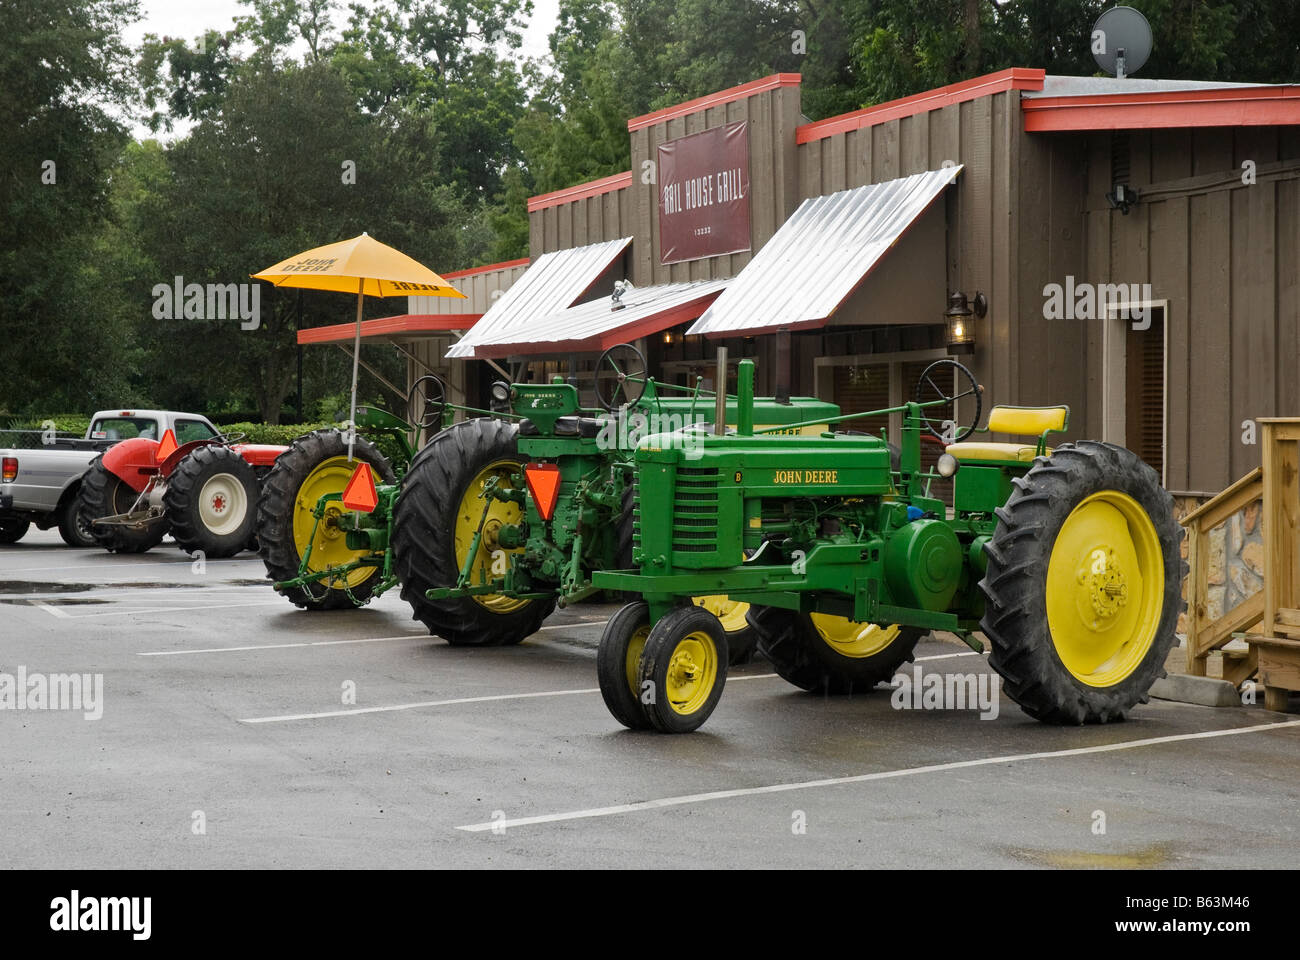 antique tractors arrive at the Rail House Grill Archer Florida Stock Photo